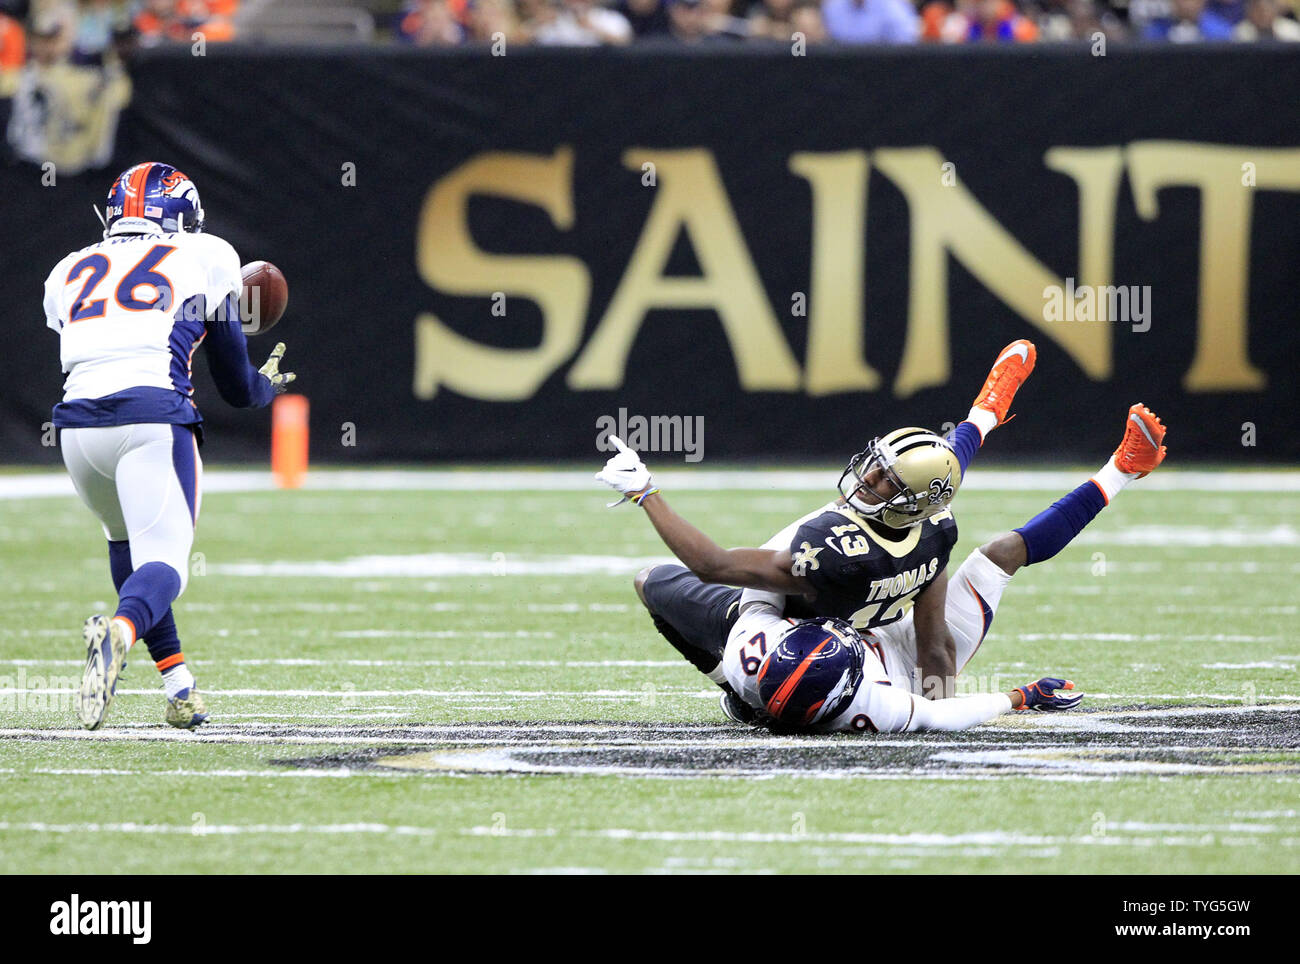 Denver Broncos free safety Darian Stewart (26) intercepts a ball tipped by New Orleans Saints wide receiver Michael Thomas (13) after he was contacted by Broncos cornerback Bradley Roby (29) in the second quarter at the Mercedes-Benz Superdome in New Orleans November 13, 2016. Photo by AJ Sisco/UPI Stock Photo